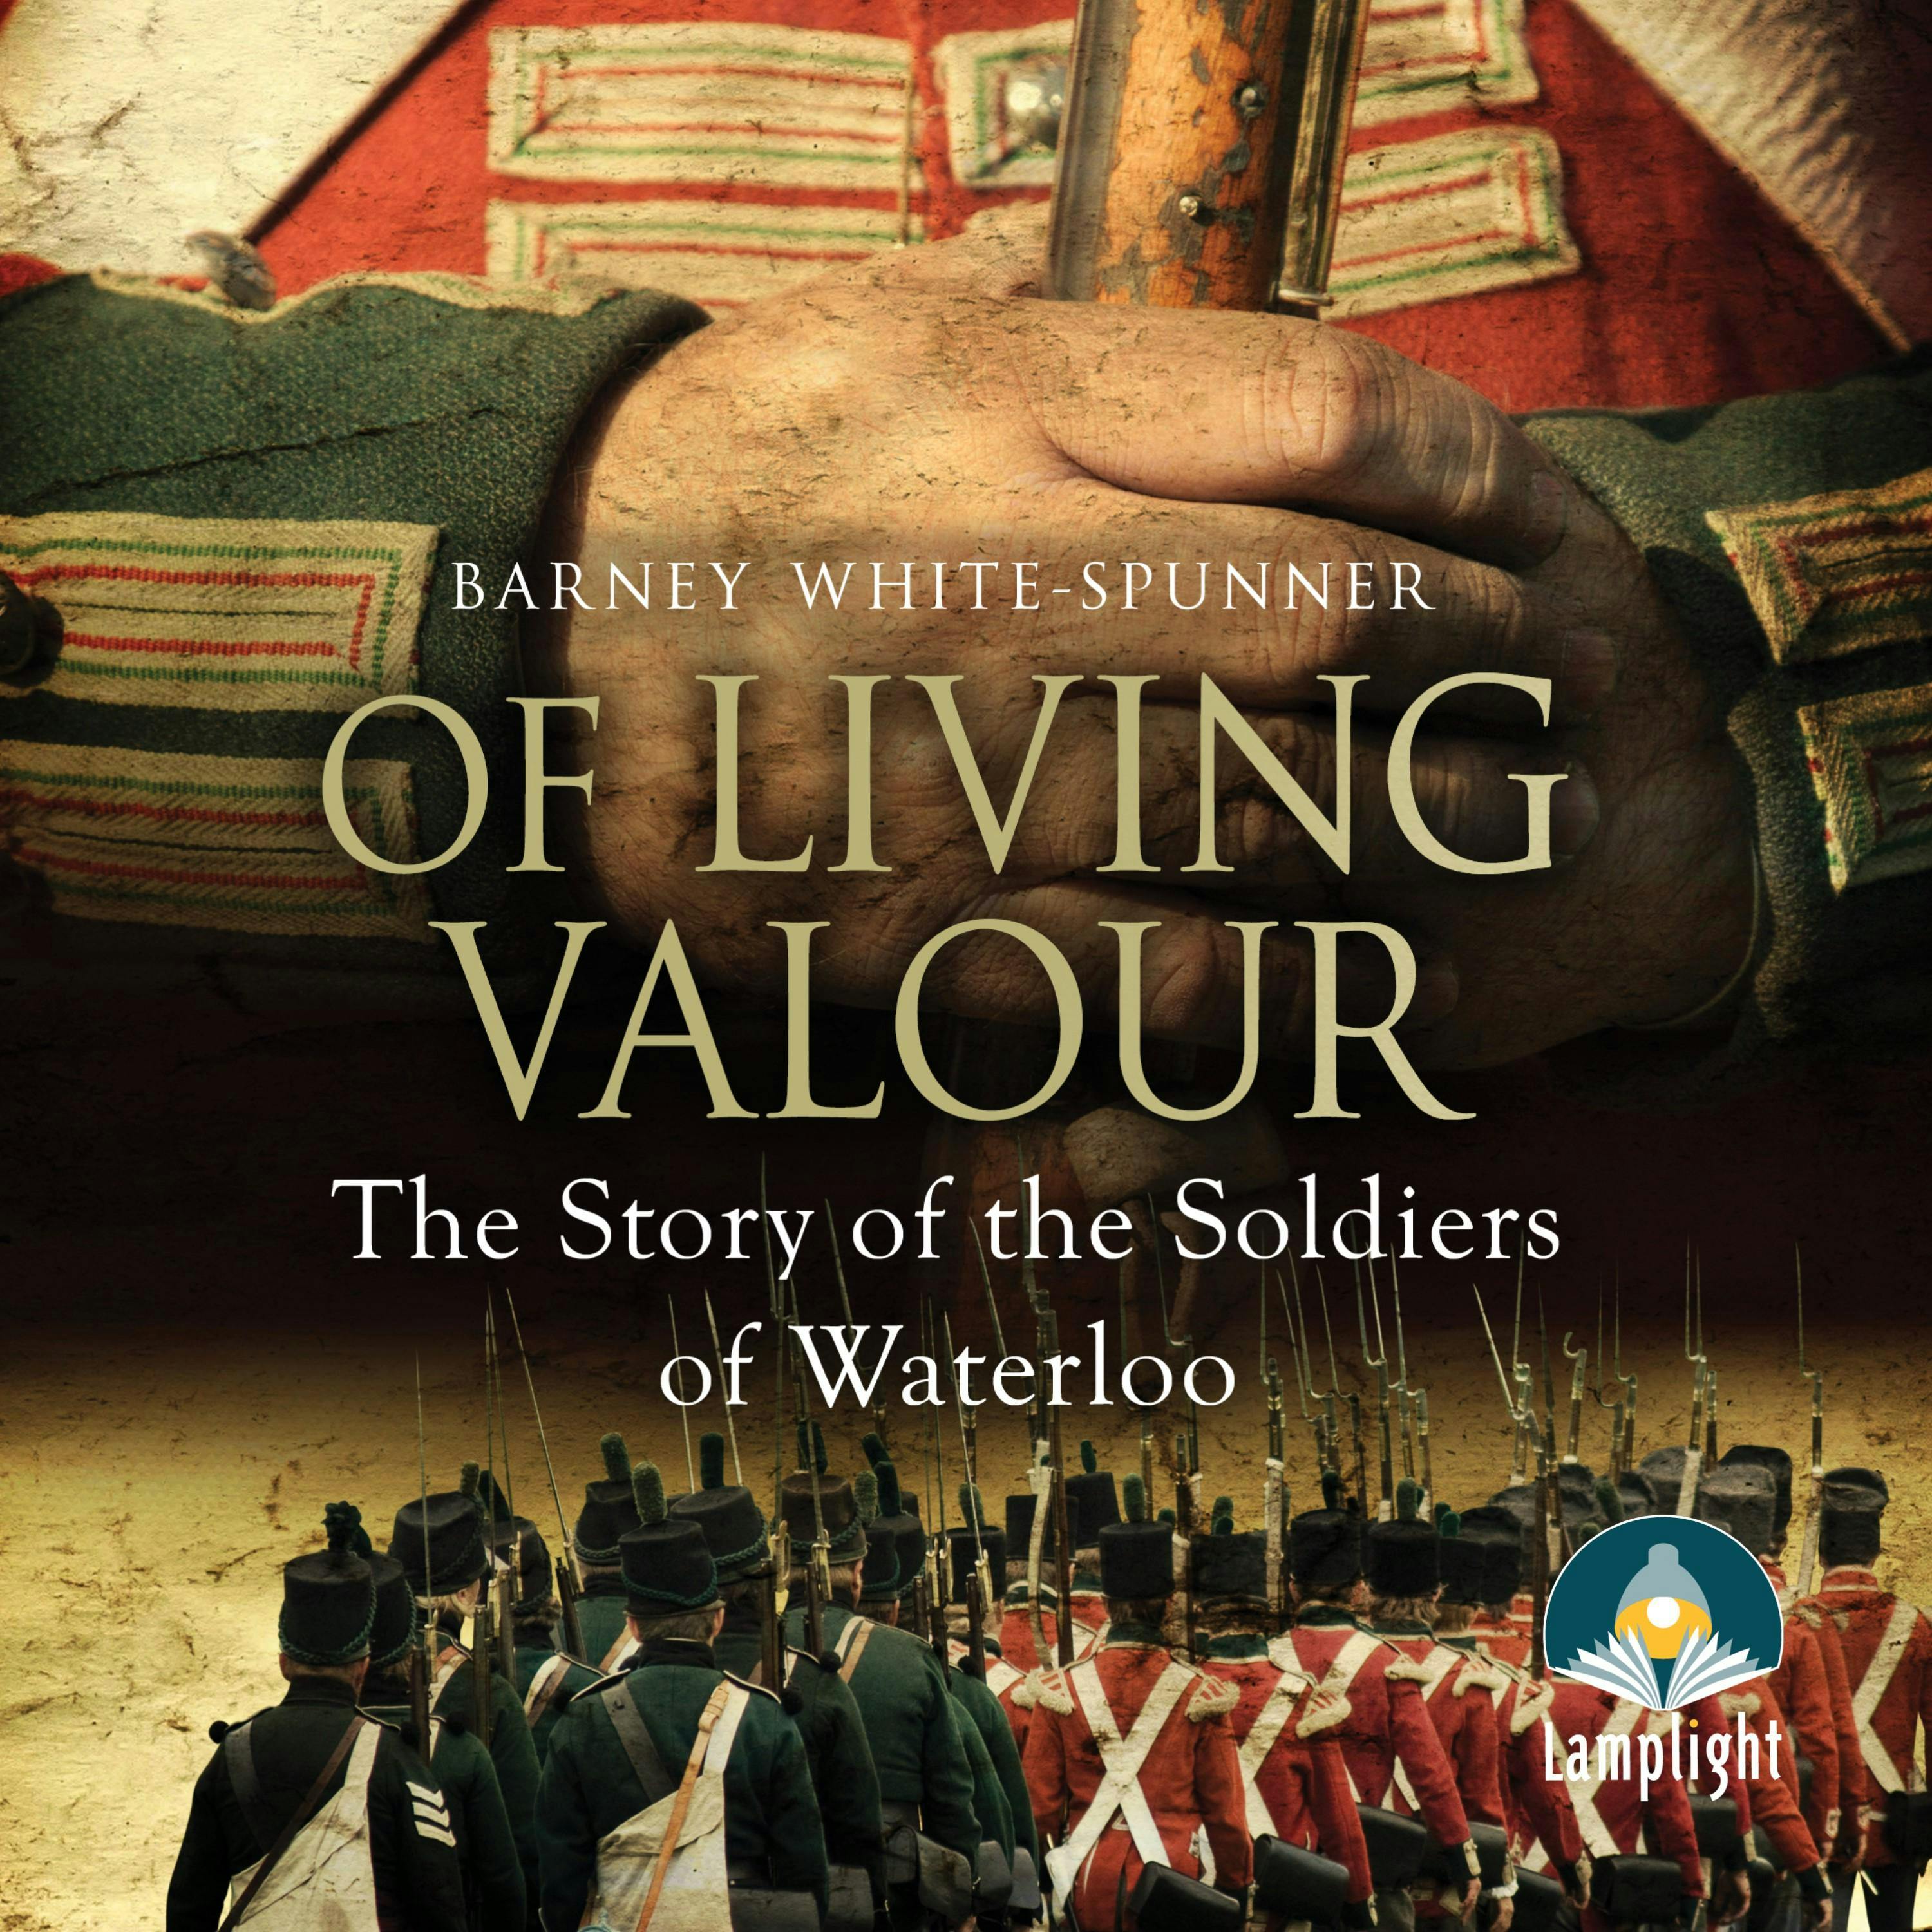 Of Living Valour: The Story of the Soldiers of Waterloo - Barney White-Spunner